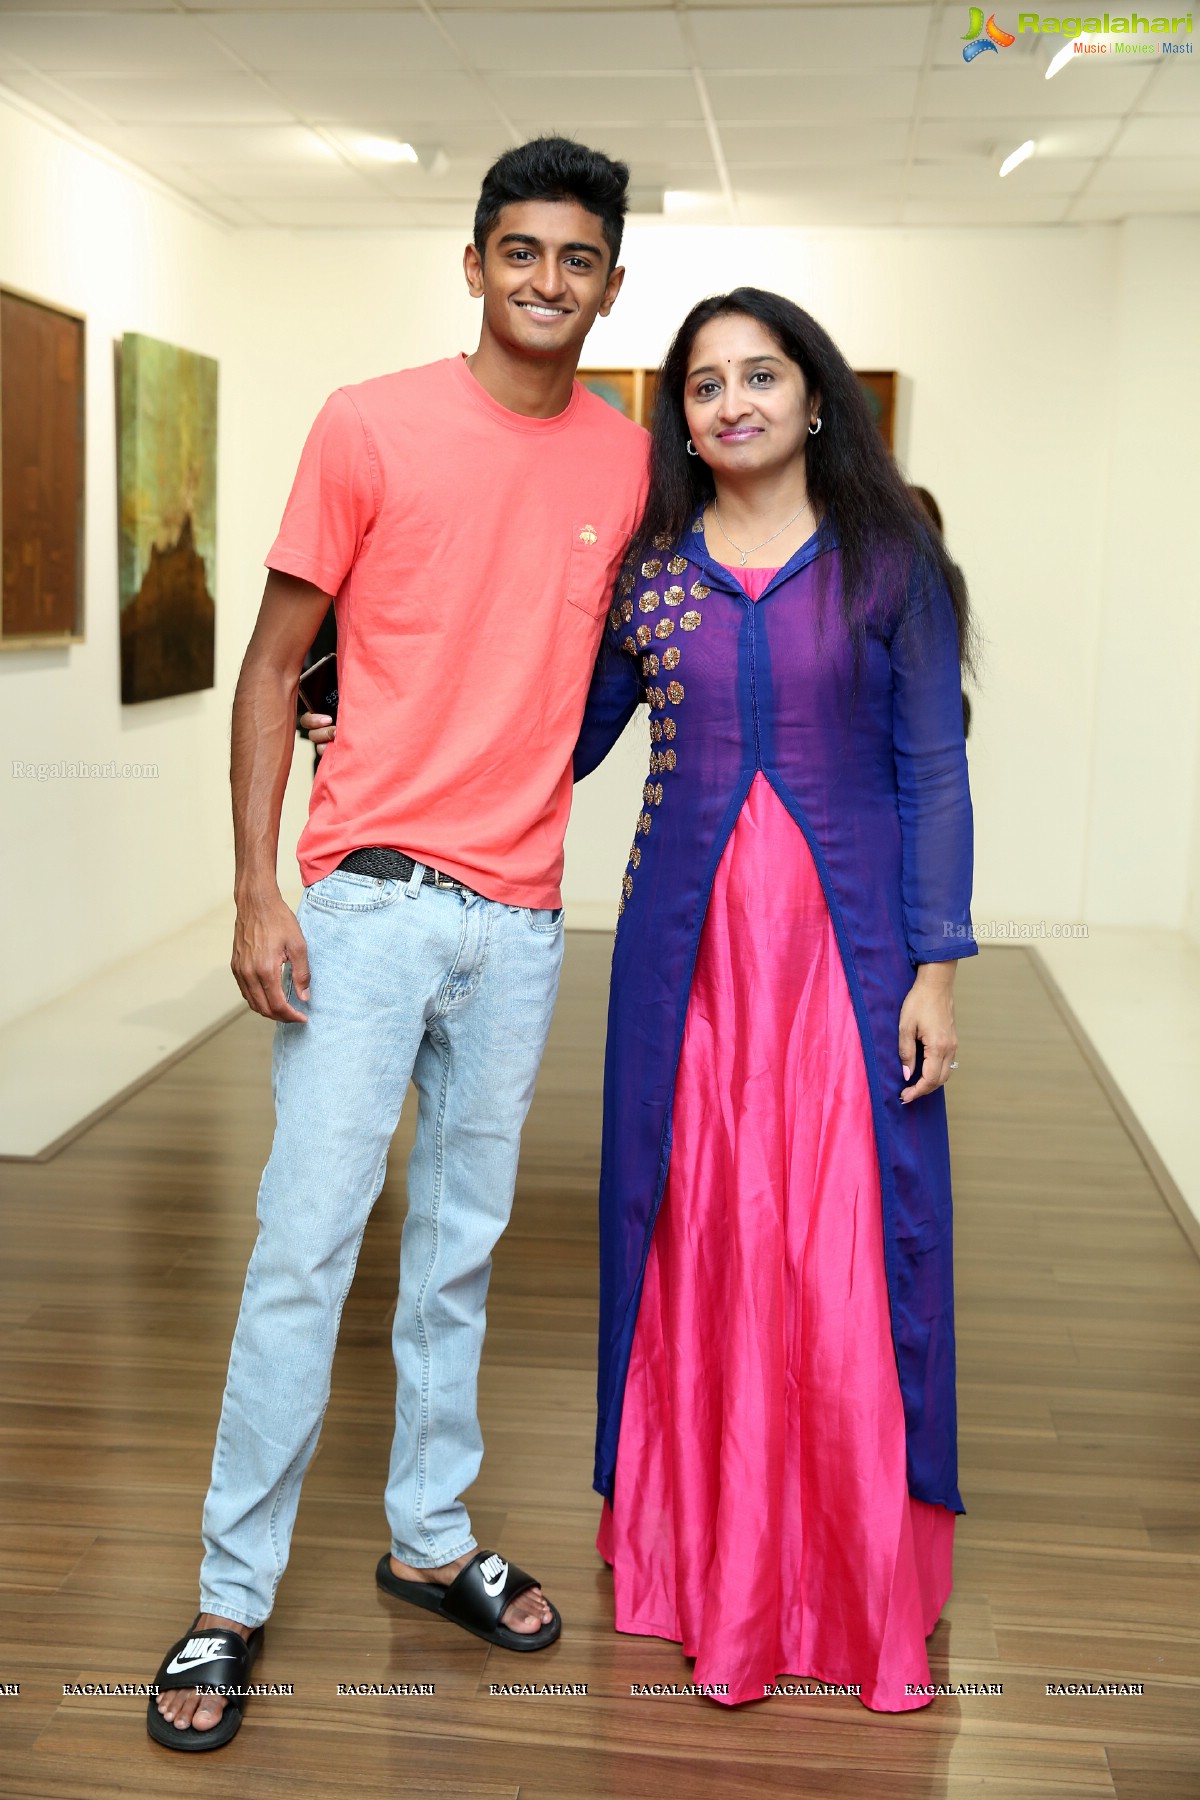 A Journey Through Impermanence - A Two-Man Art Exhibition at Dhi Art Space